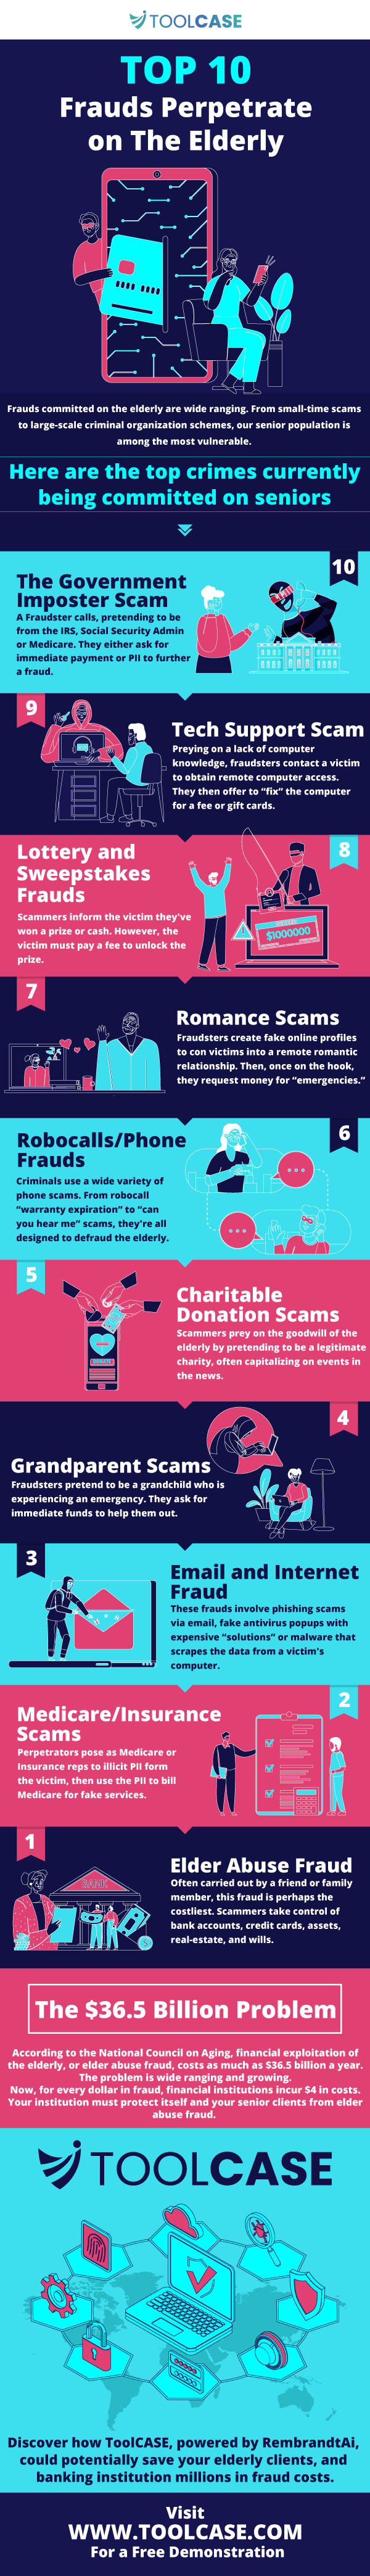 Top 10 Frauds Perpetrated on The Elderly